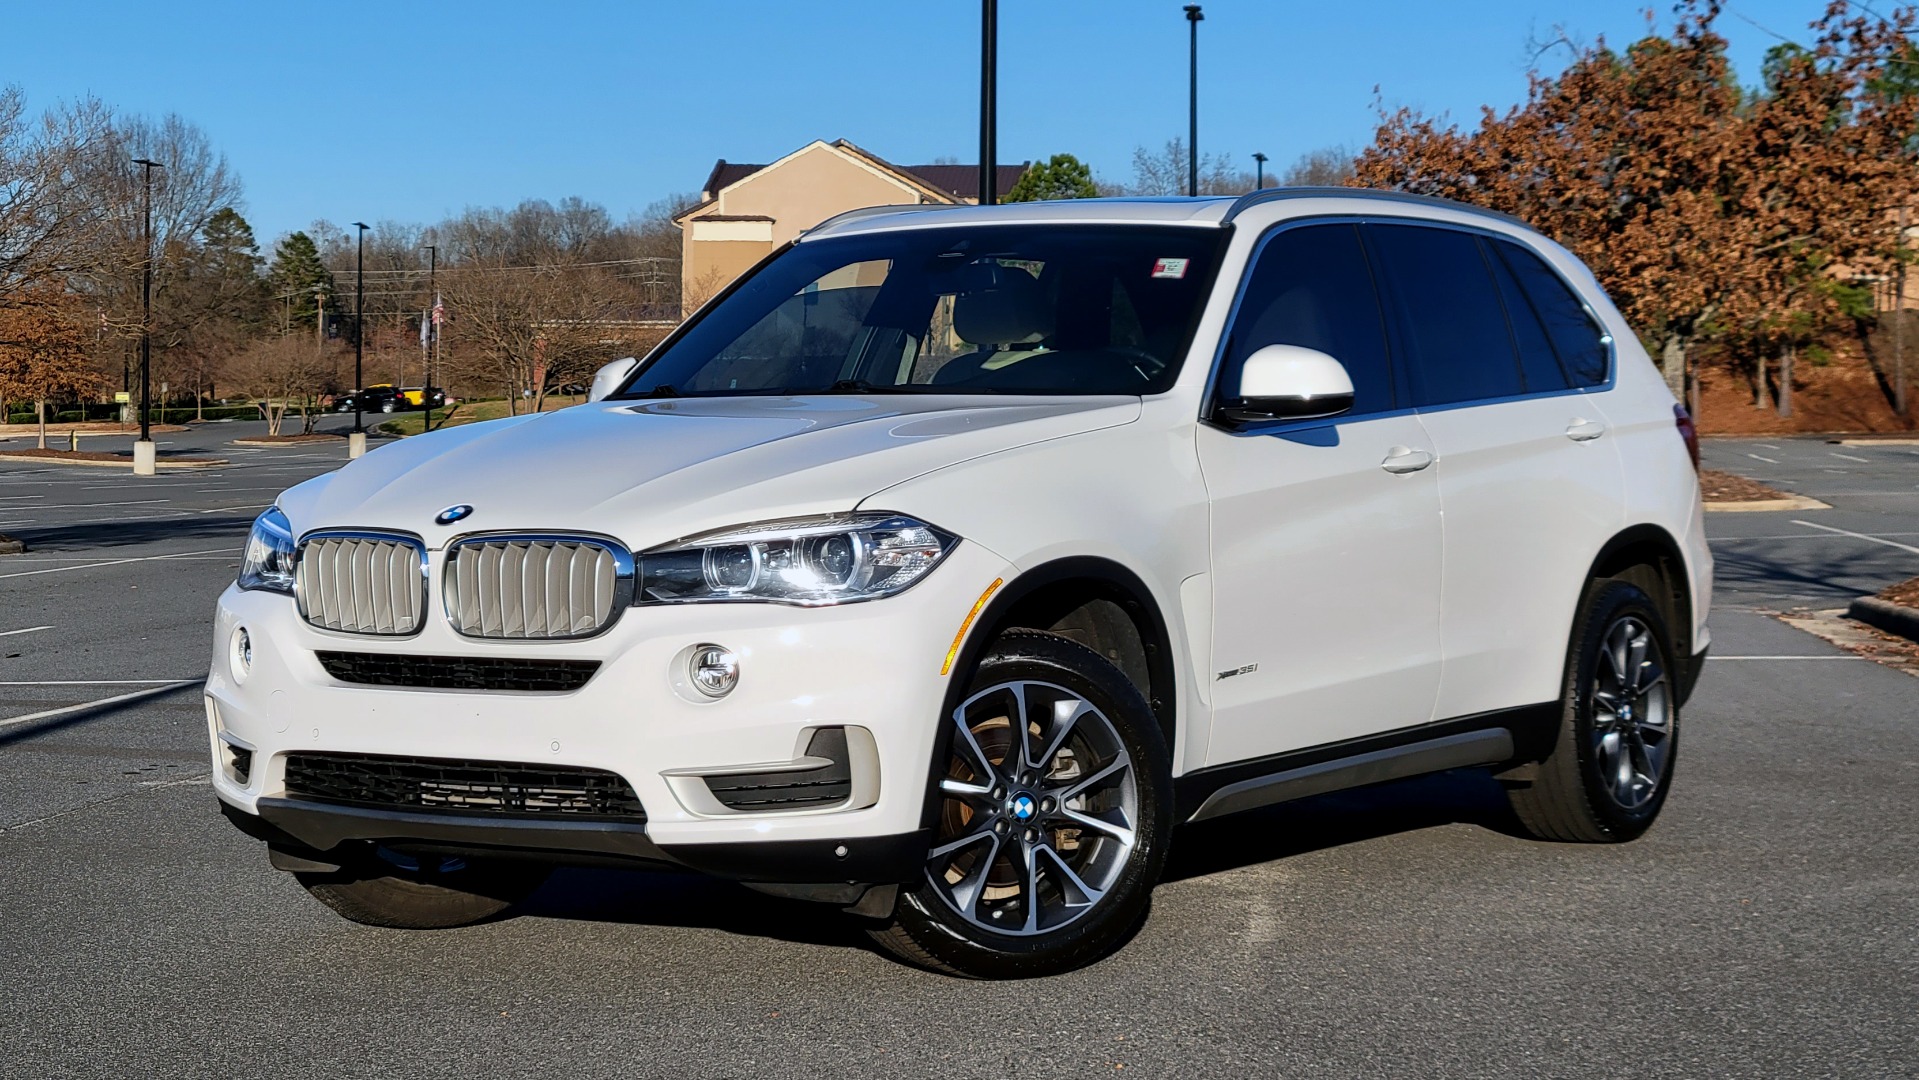 Used 2018 BMW X5 XDRIVE35I PREMIUM / DRVR ASST / HUD / WIRELESS CHARGING / HEATED SEATS for sale $41,995 at Formula Imports in Charlotte NC 28227 1